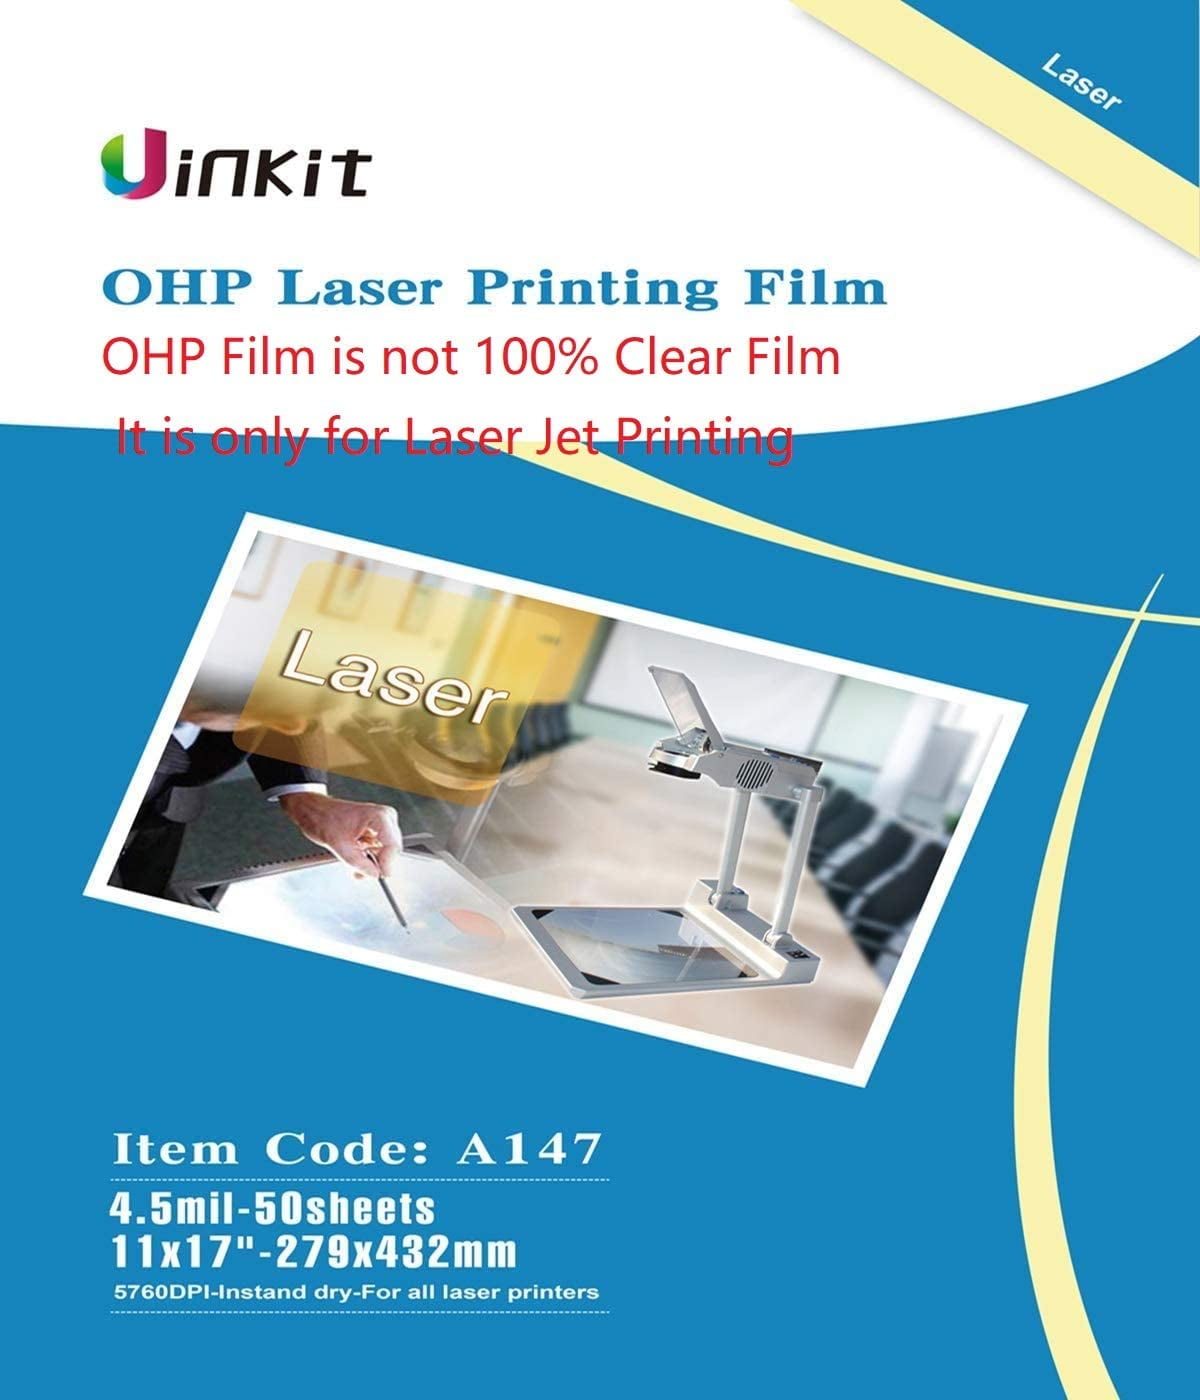 40 Sheets Ohp Clear Printable Transparency Film 8.5 x 11 Inches for Overhead Projectors for Laser Printers